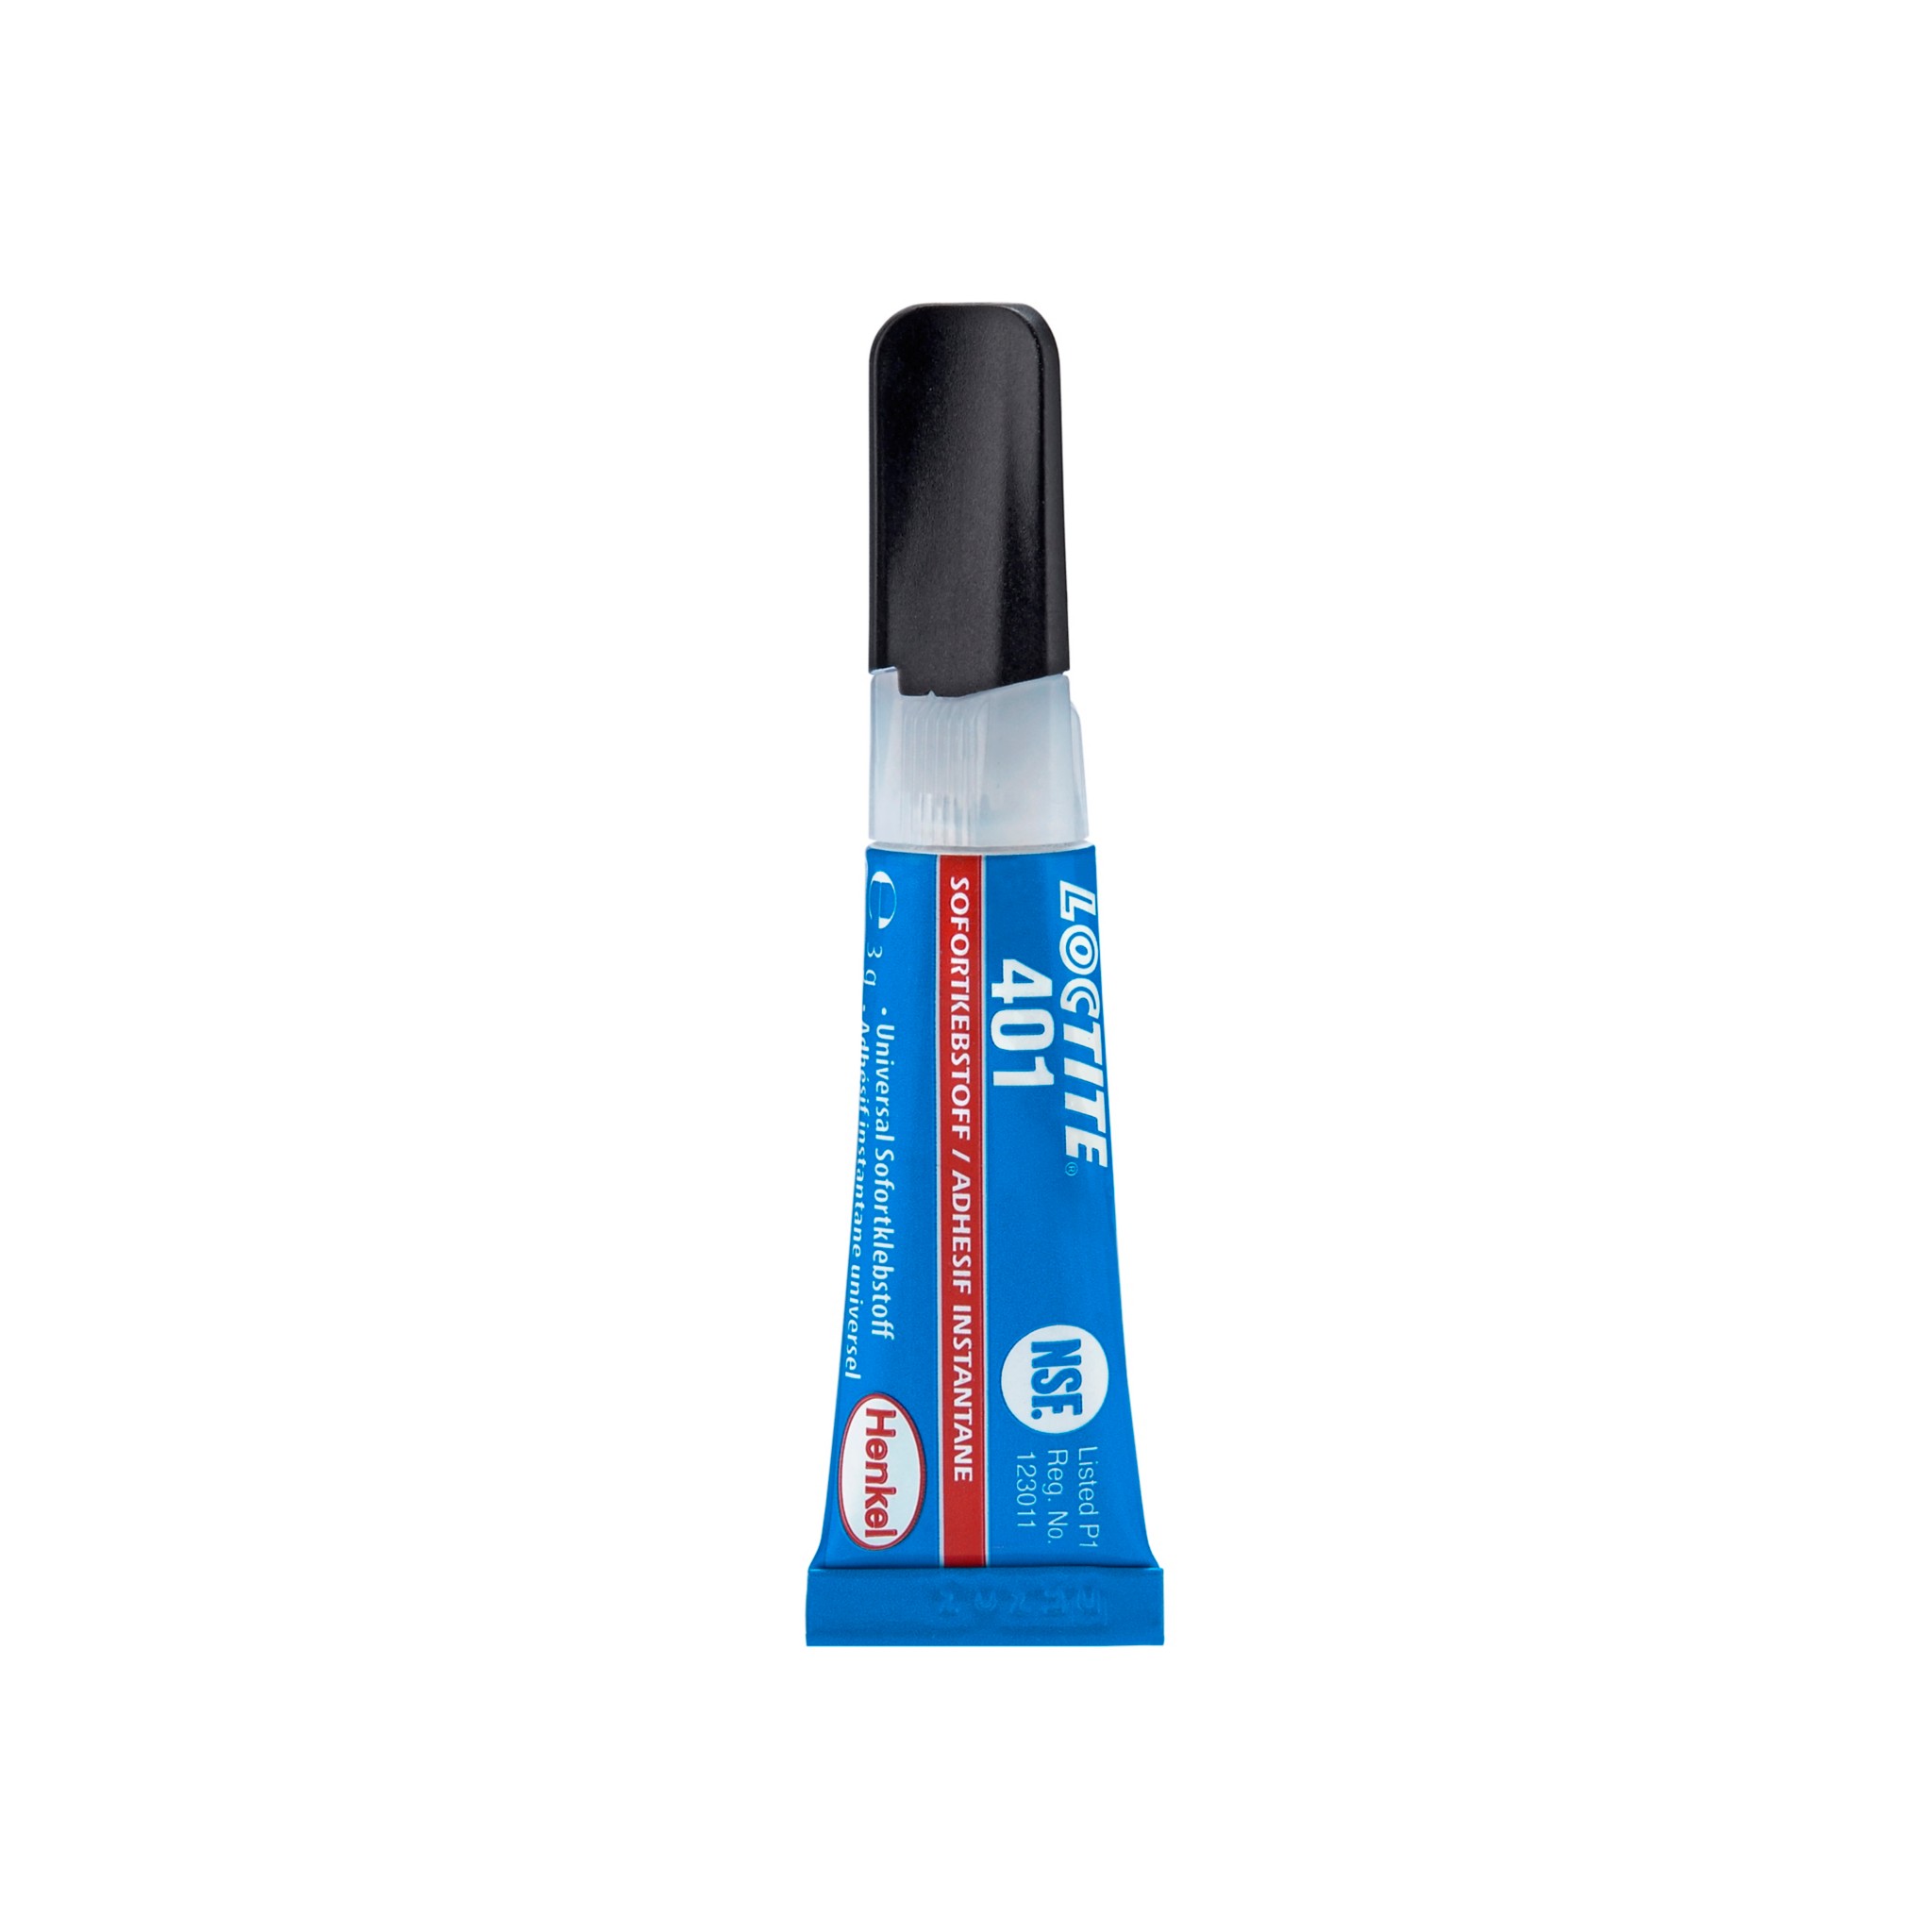 Loctite 401 universal fast curing instant adhesive, low viscosity, for